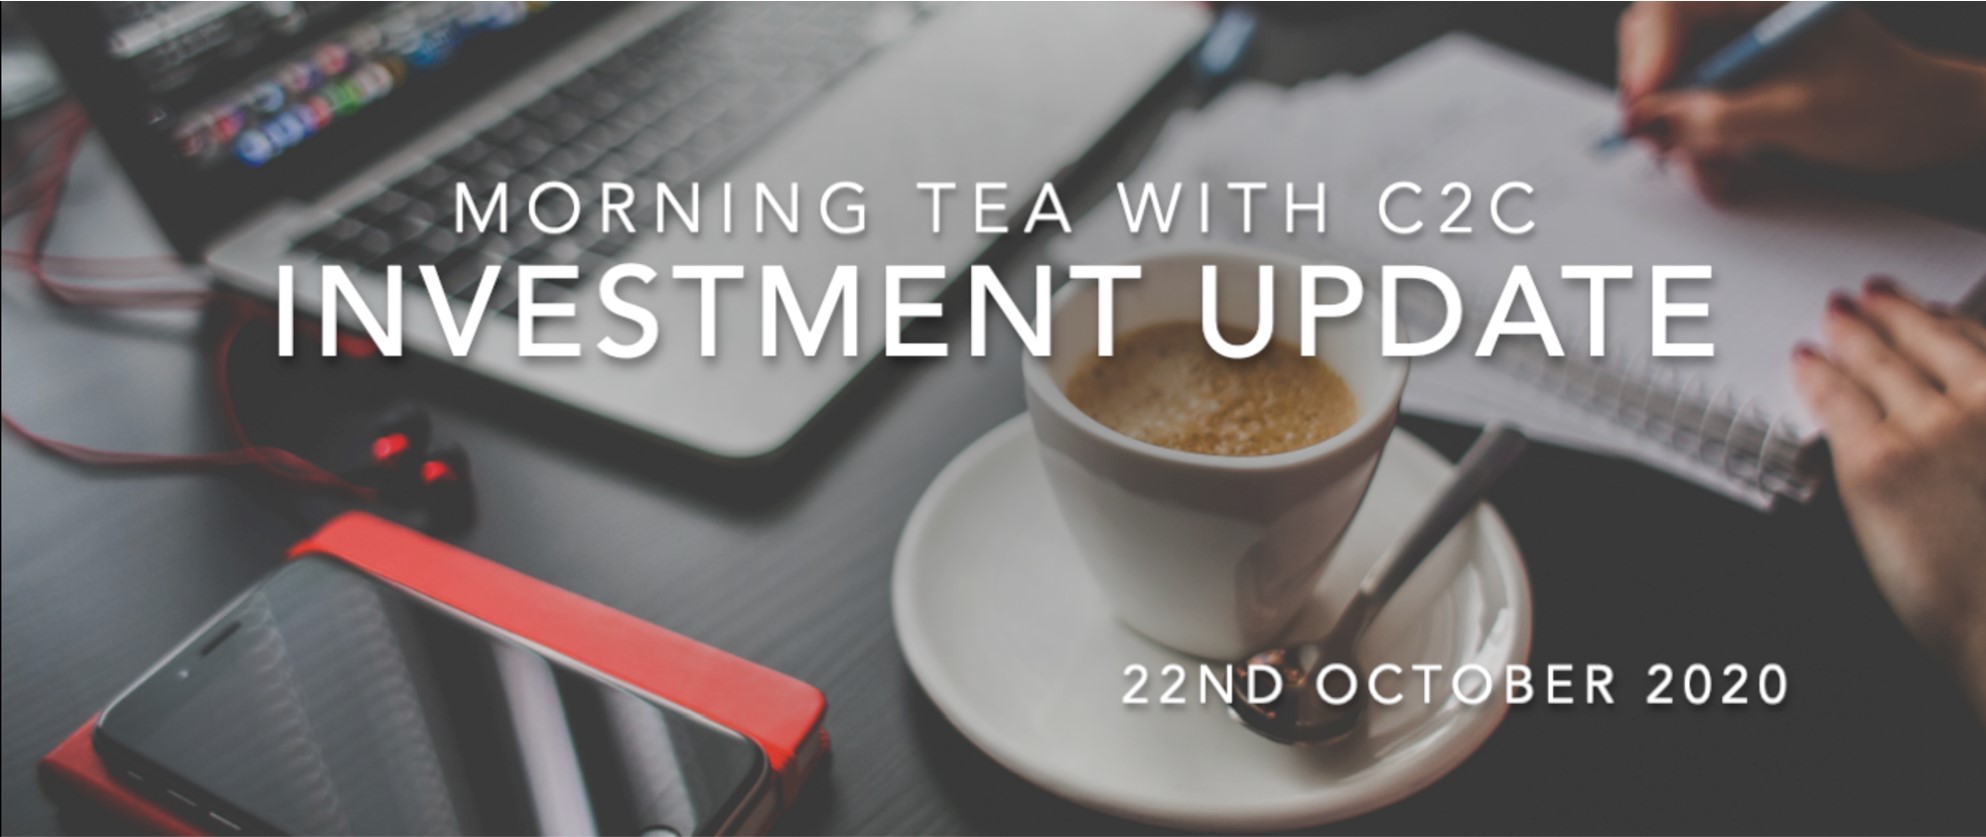 Morning Tea with C2C Investment update